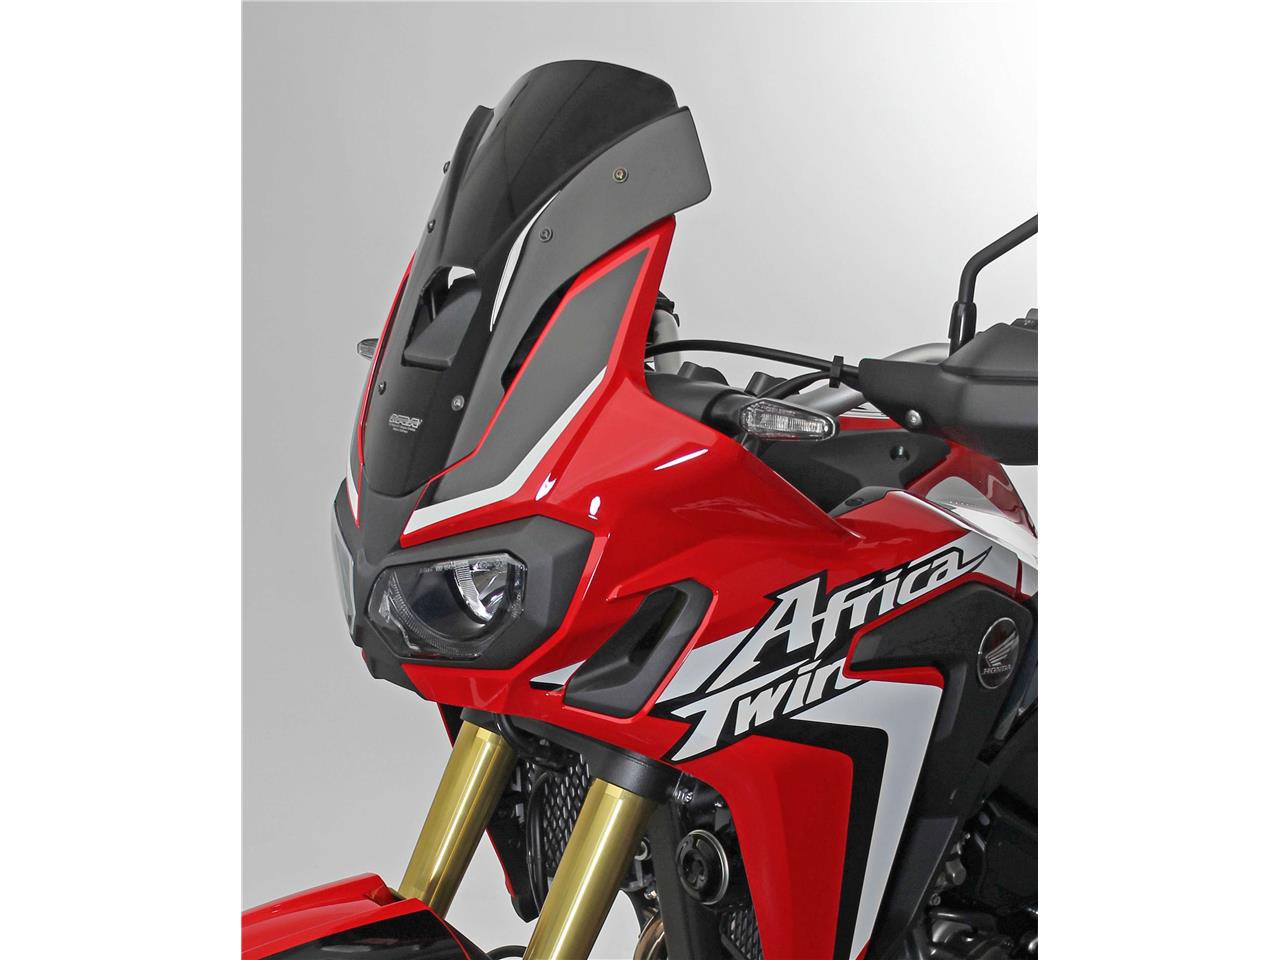 Bulle Moto MRA Type Sport pour Africa Twin 1000 (16-19)